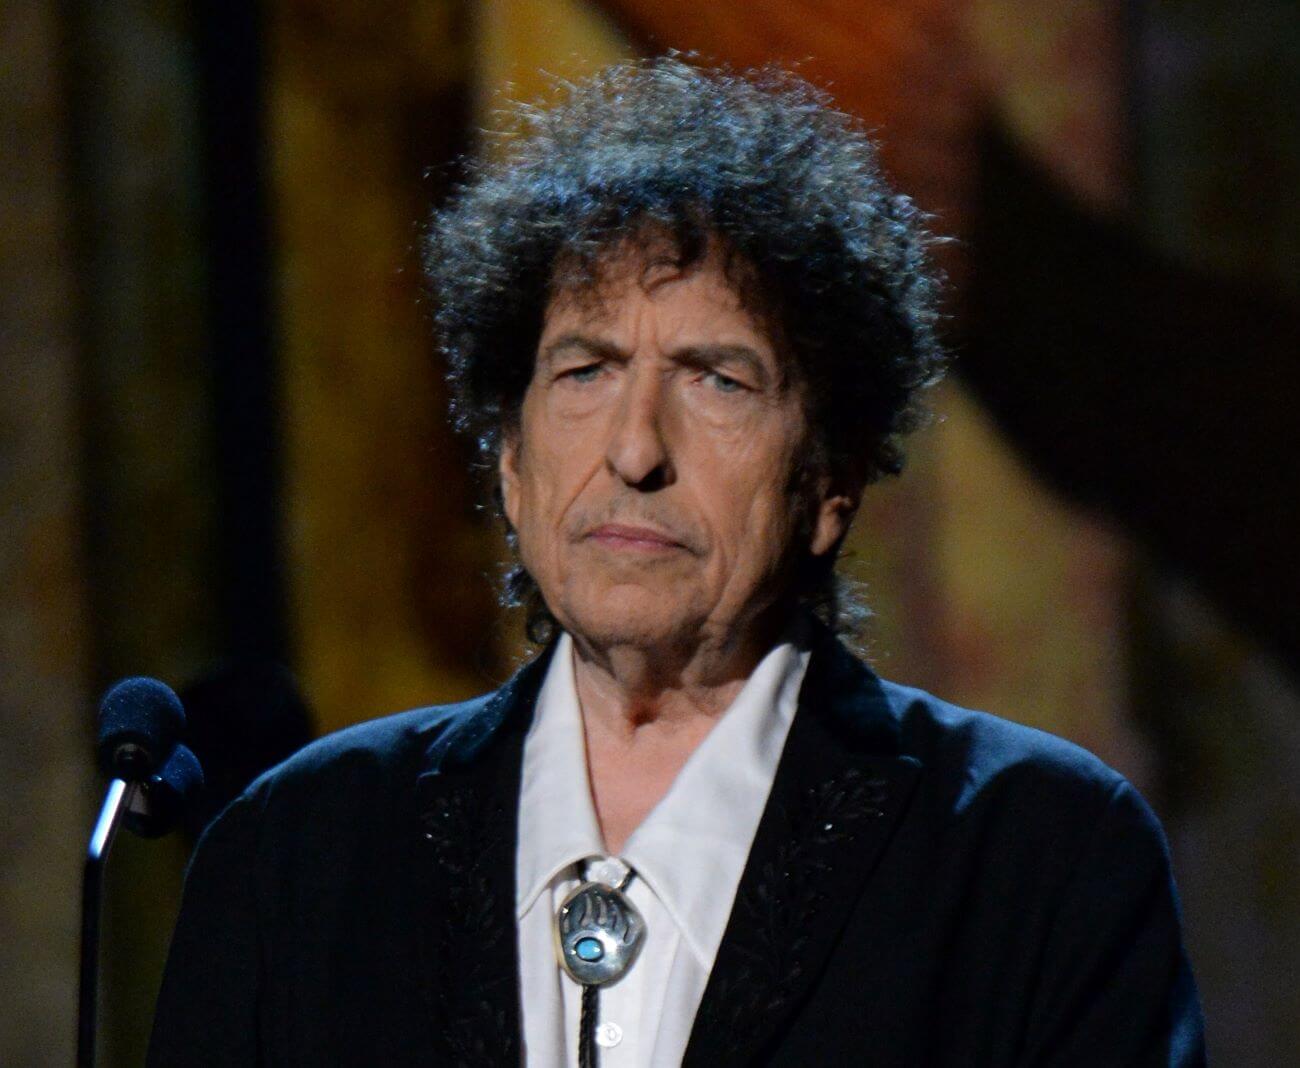 Bob Dylan Borrowed From a Confederate Poet on Several Songs